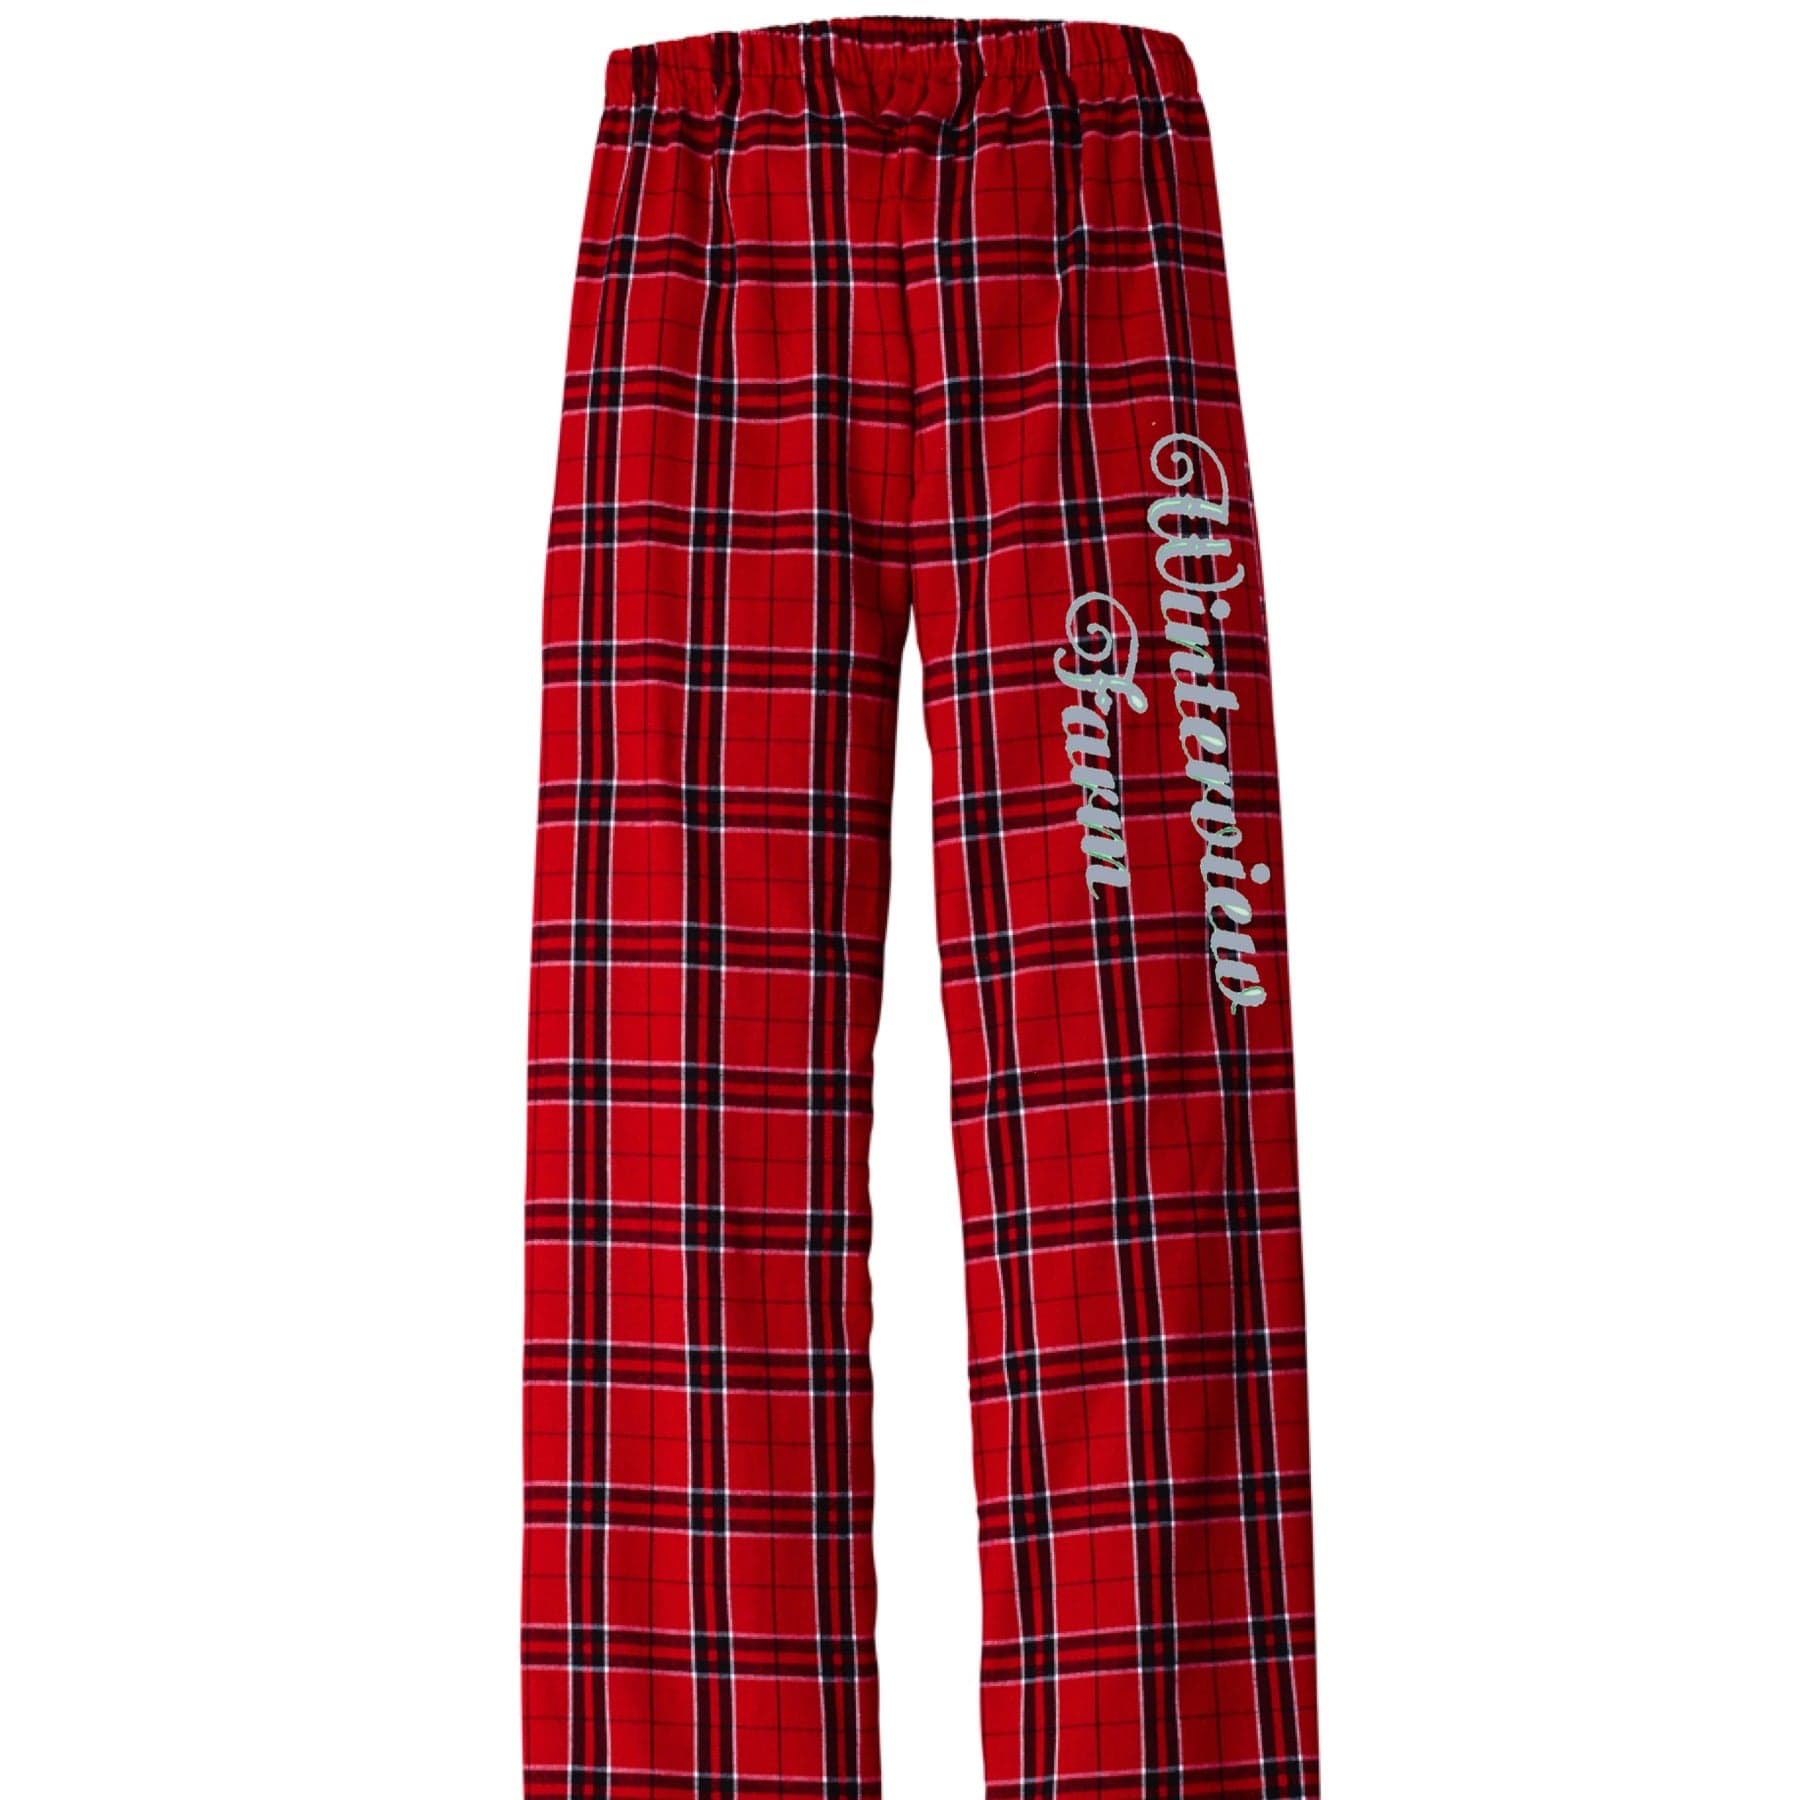 Equestrian Team Apparel Winterview Farm Flannel Pants equestrian team apparel online tack store mobile tack store custom farm apparel custom show stable clothing equestrian lifestyle horse show clothing riding clothes horses equestrian tack store